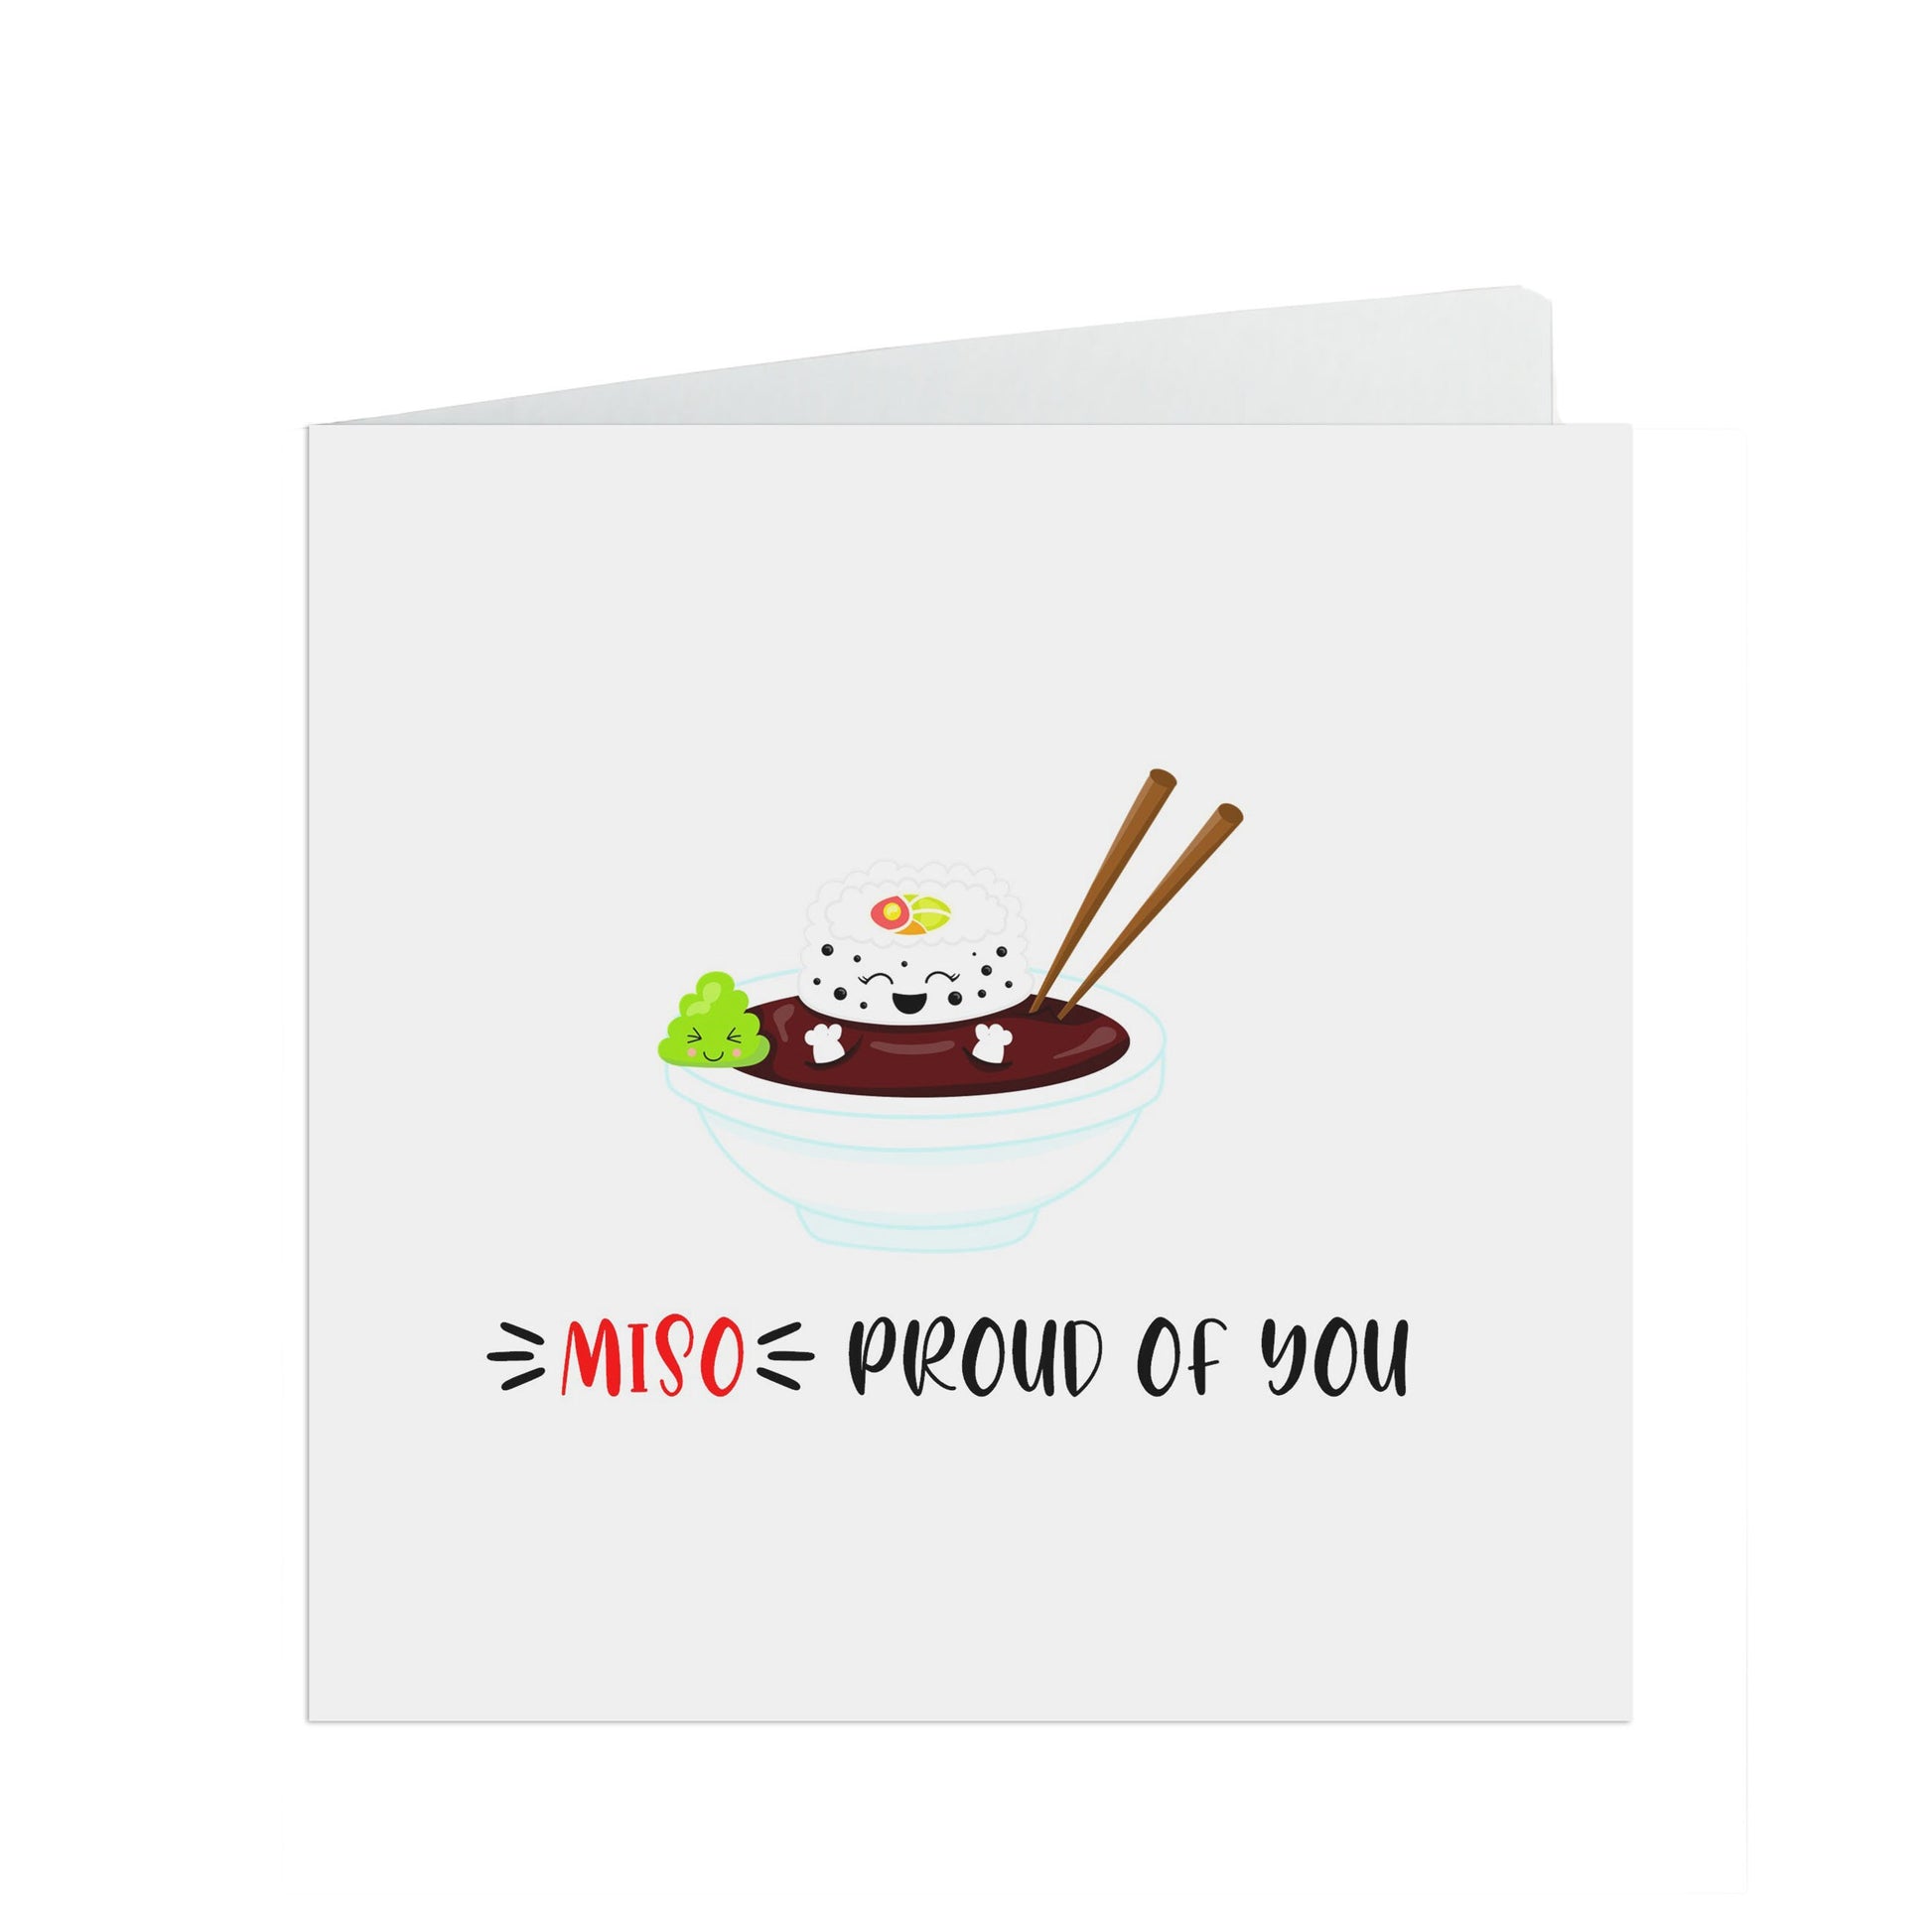 Miso proud of you, funny food motivation, encouragement pun card